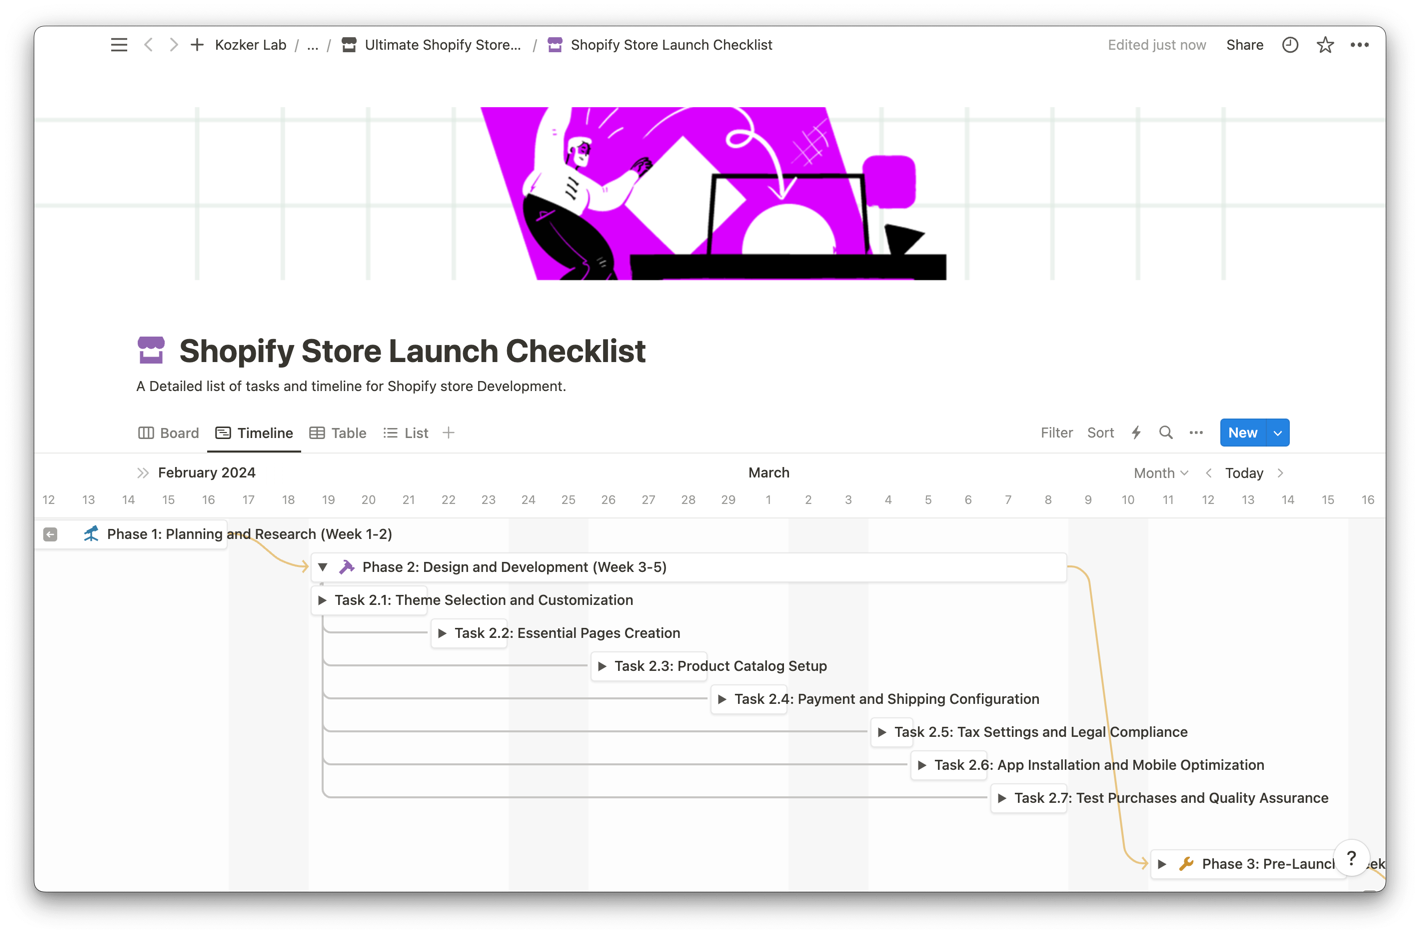 A screenshot of the Shopify Store Launch Checklist